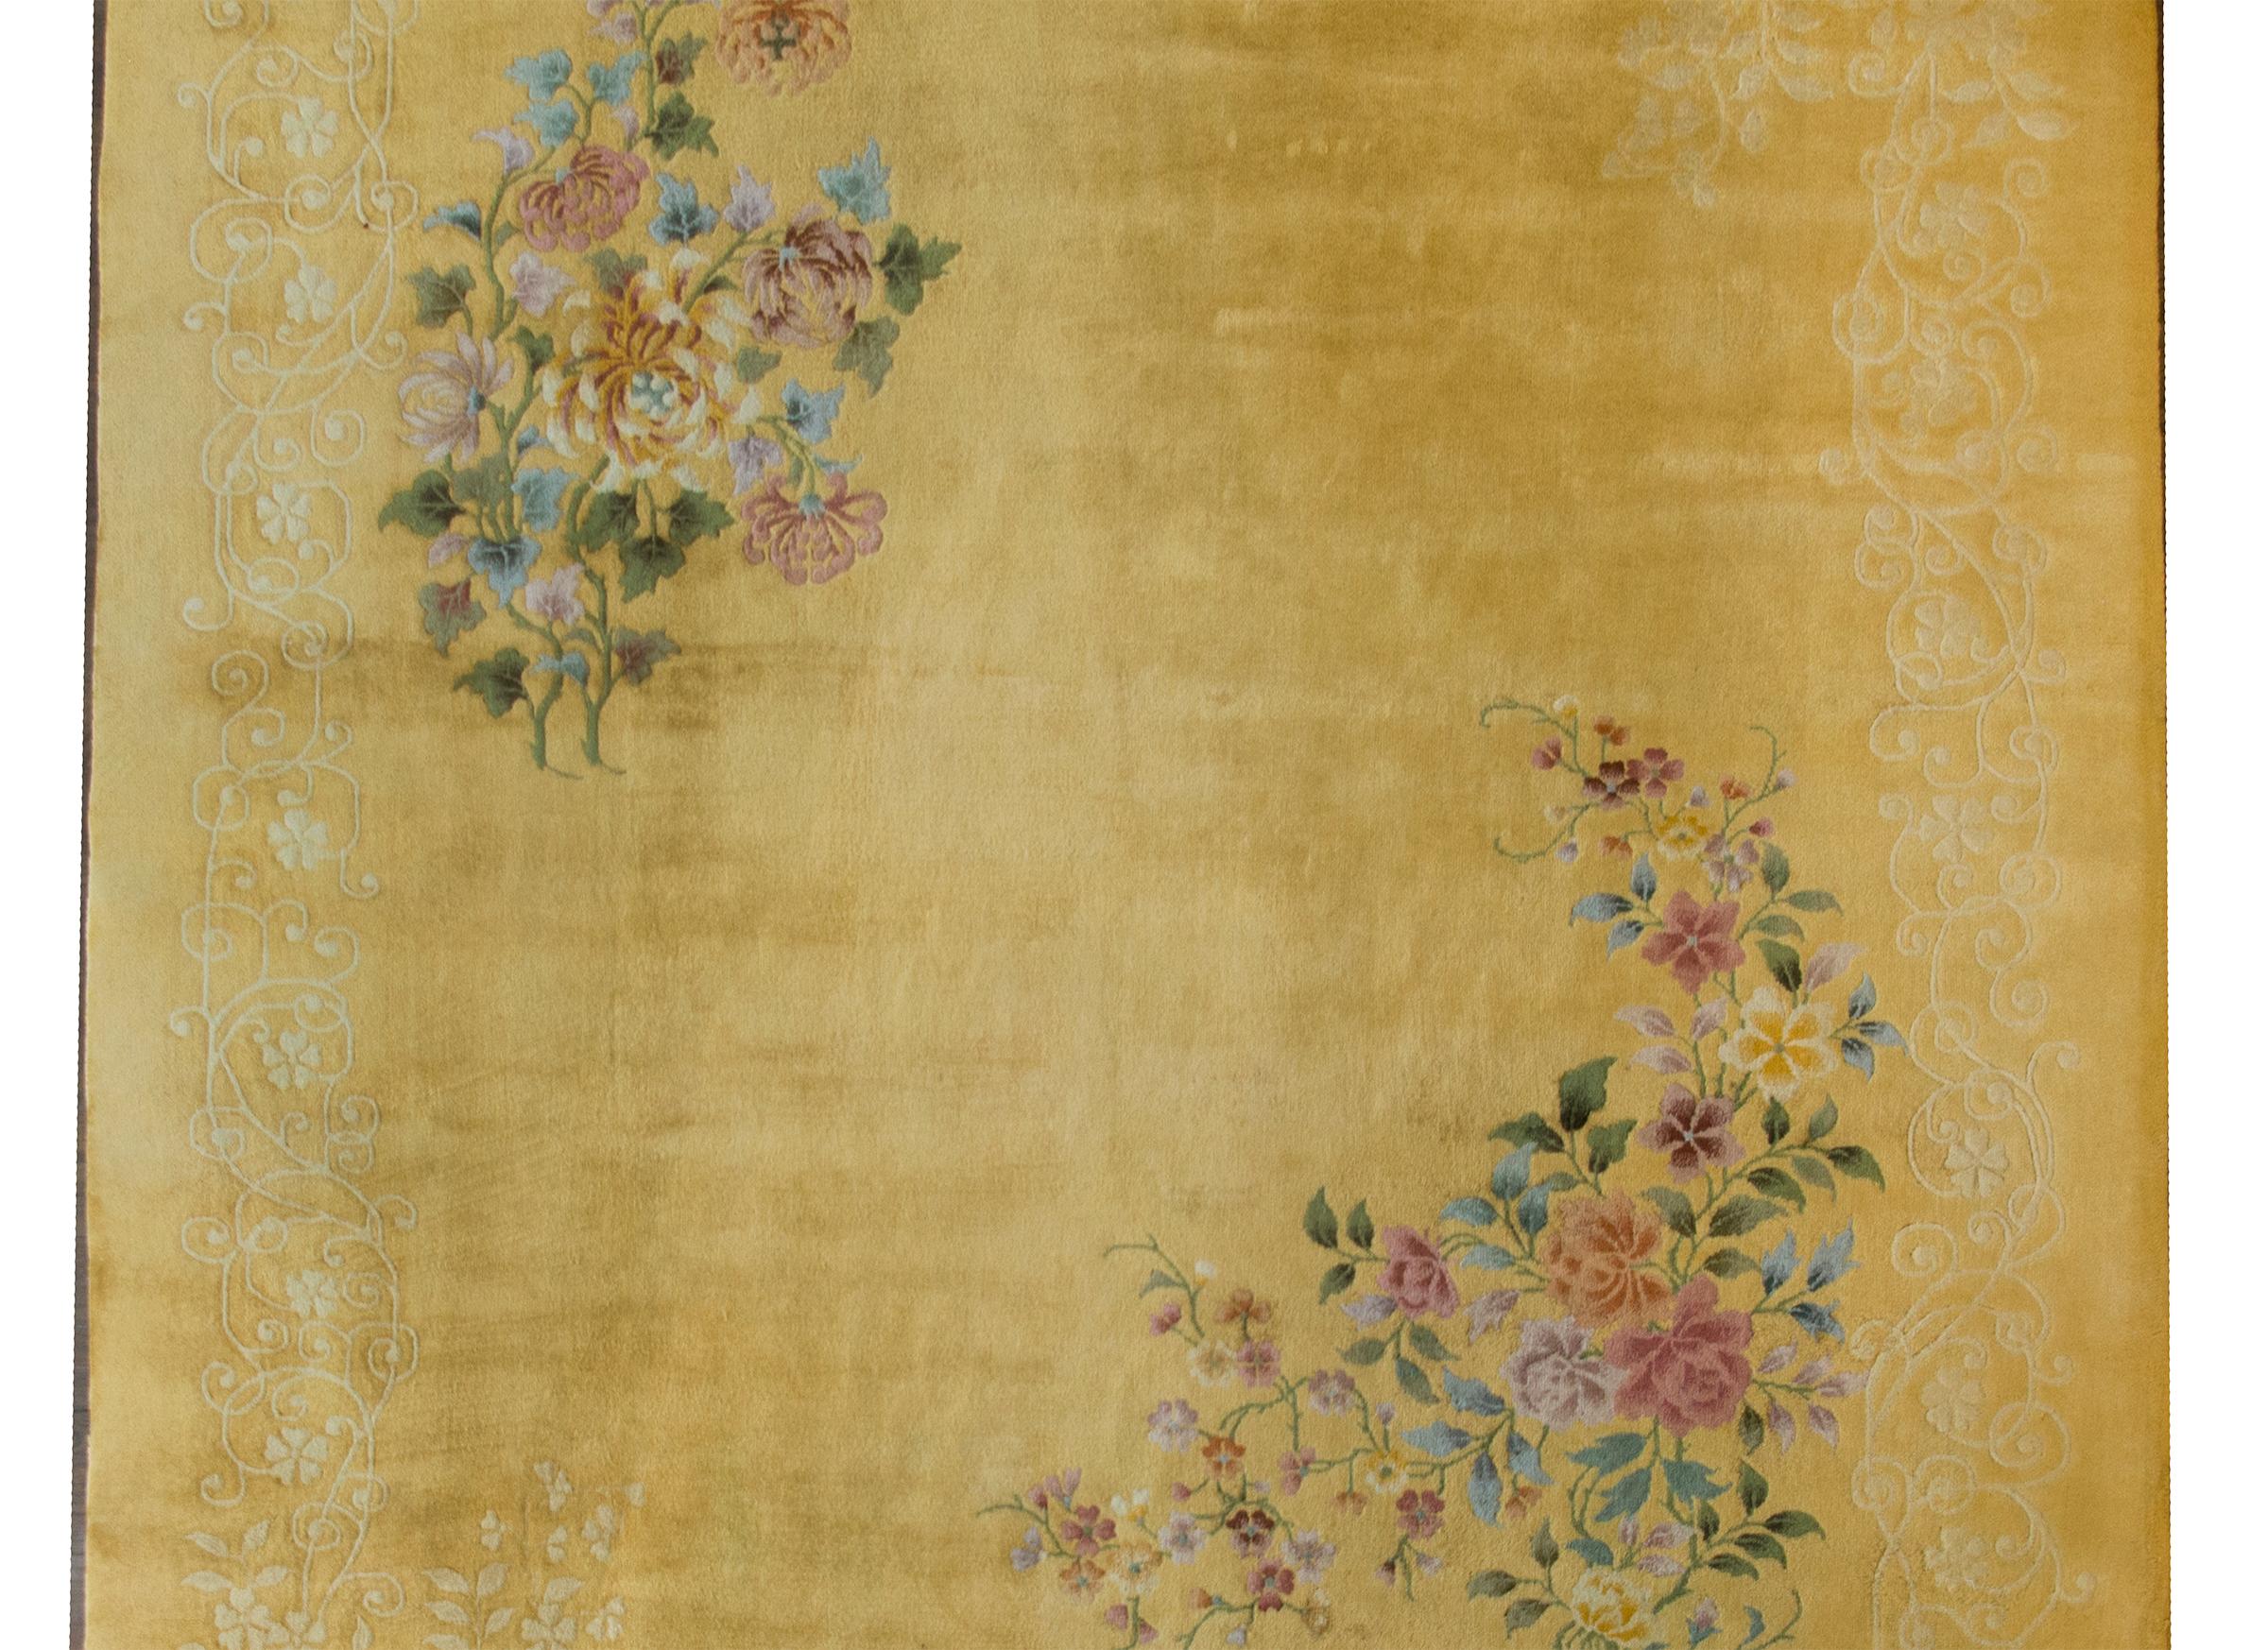 A simple but chic early 20th century Chinese Art Deco rug with two large floral clusters in opposite corners, one with chrysanthemums and the other with peonies, and surrounded by a tone on tone pale yellow floral patterned border against a bold